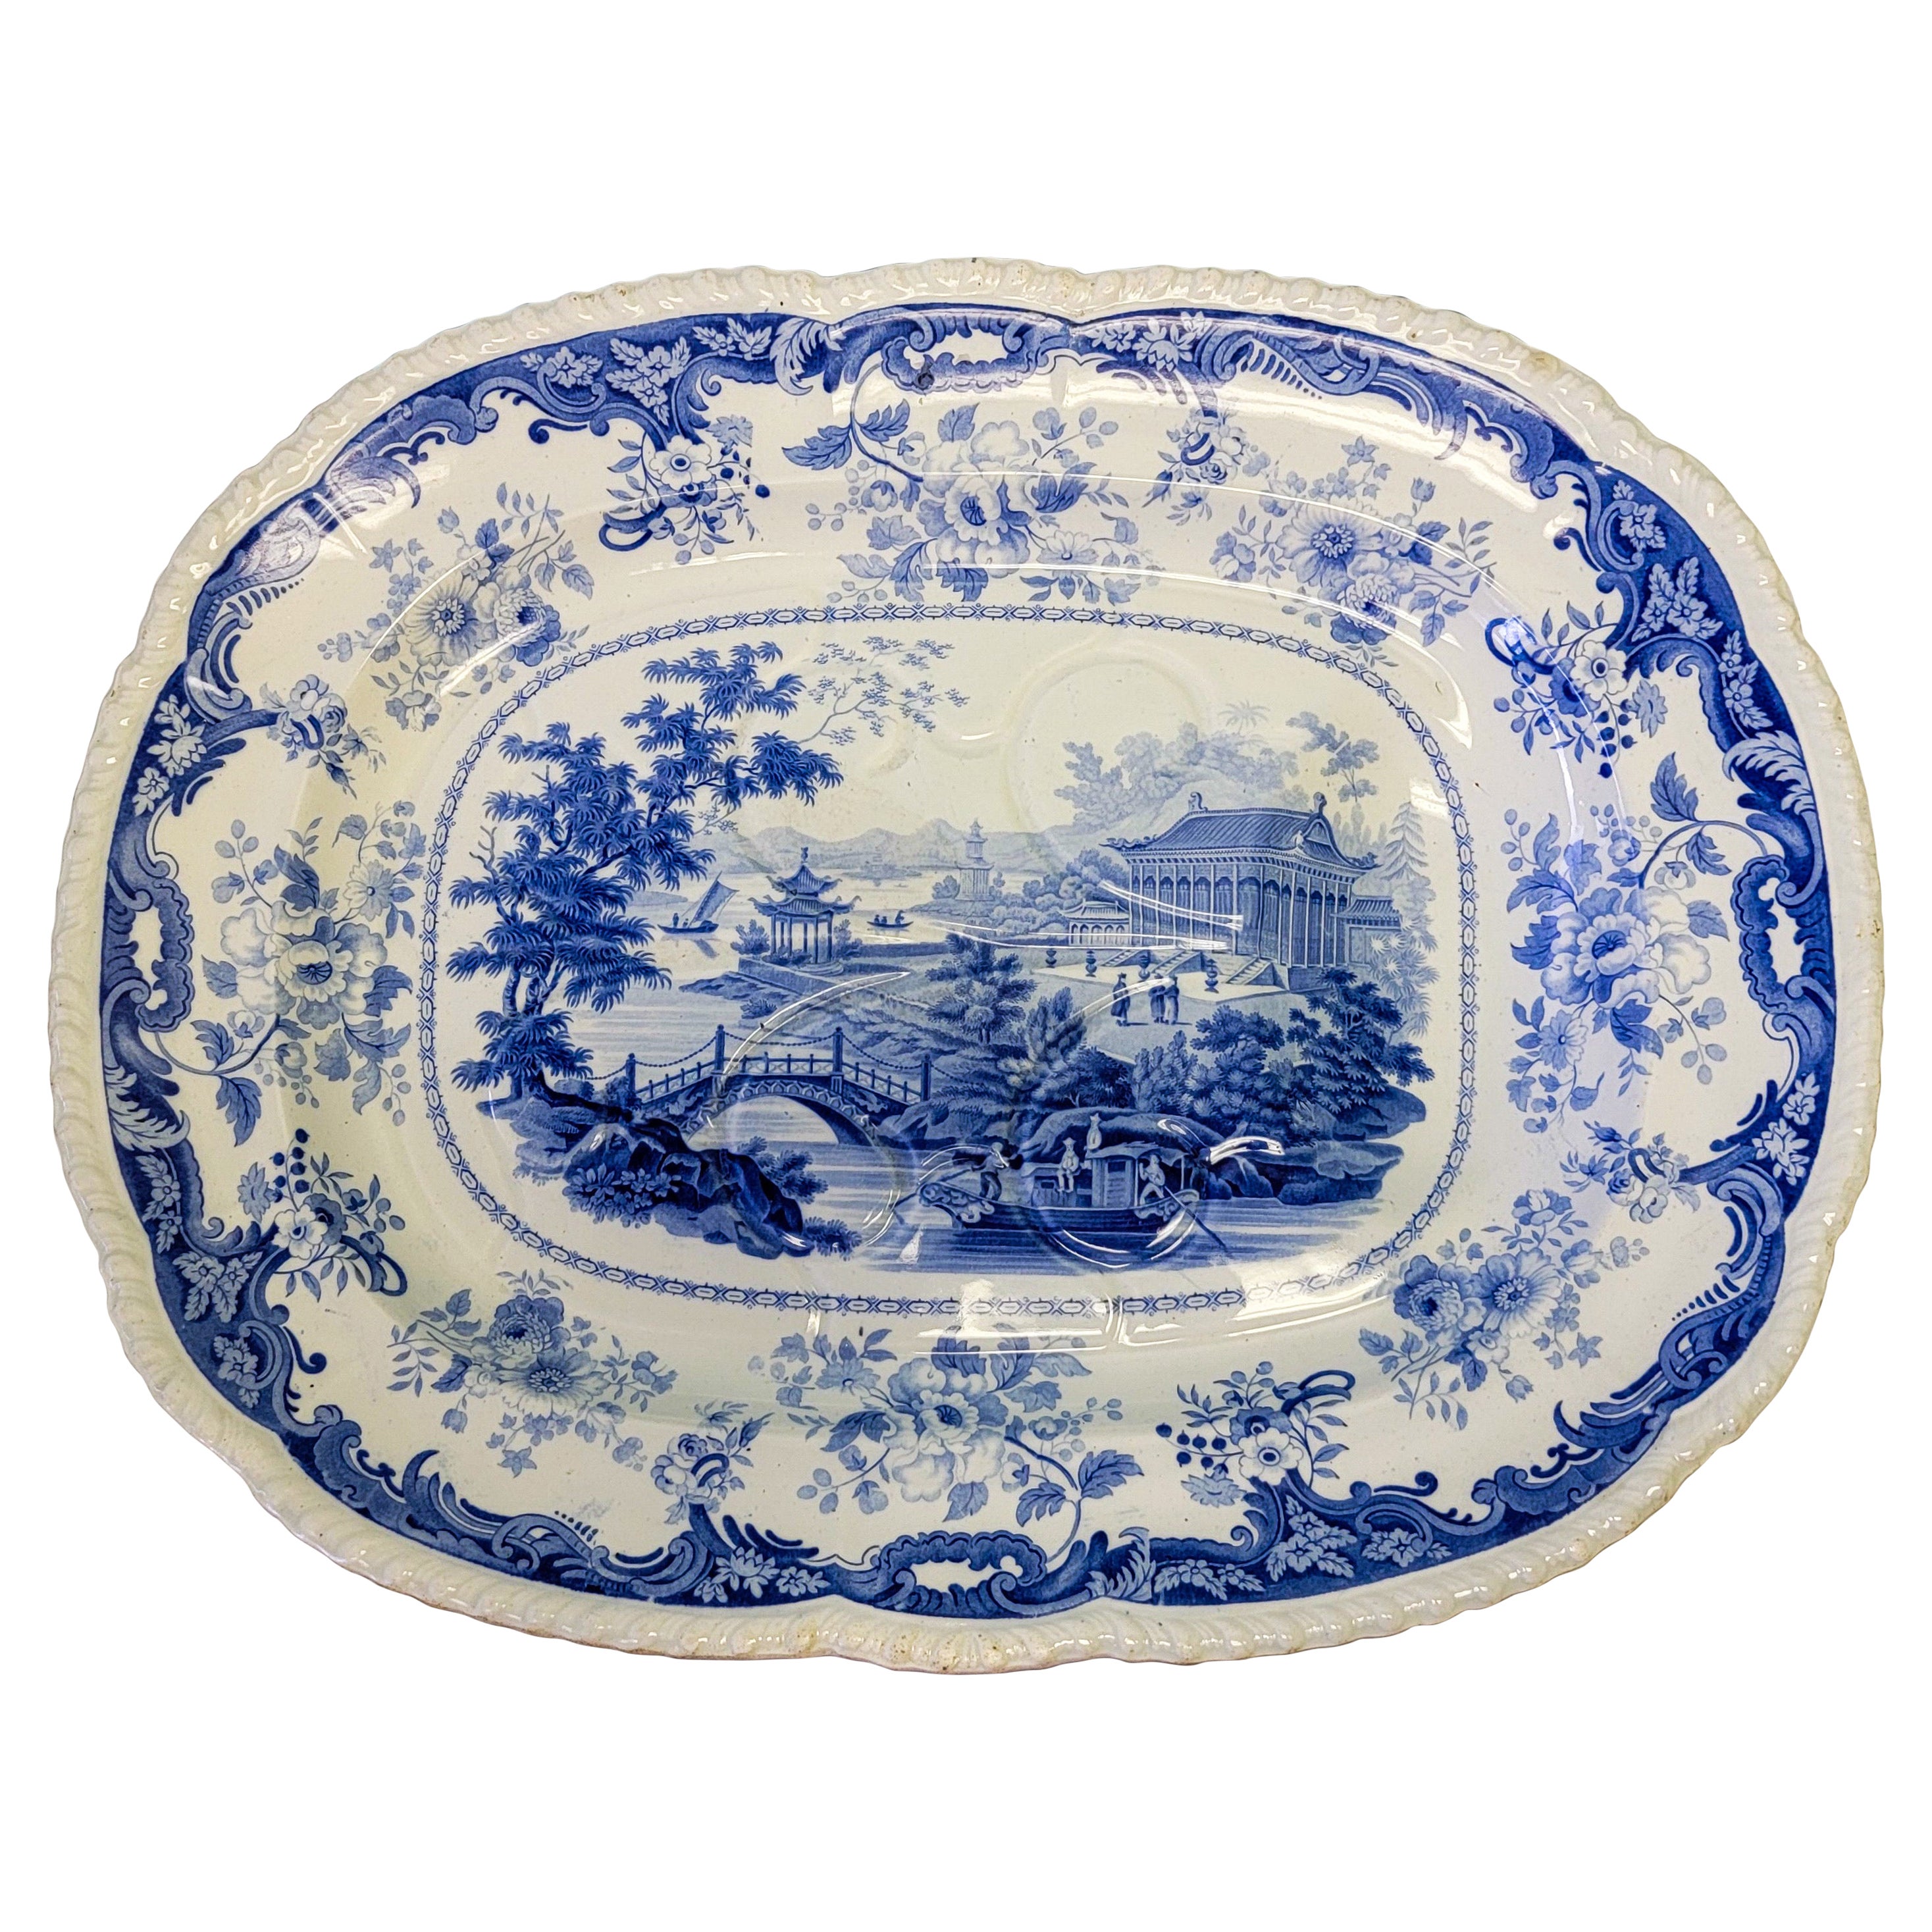 19th-C. Minton Chinese Marine Opaque Blue and White Transferware Platter